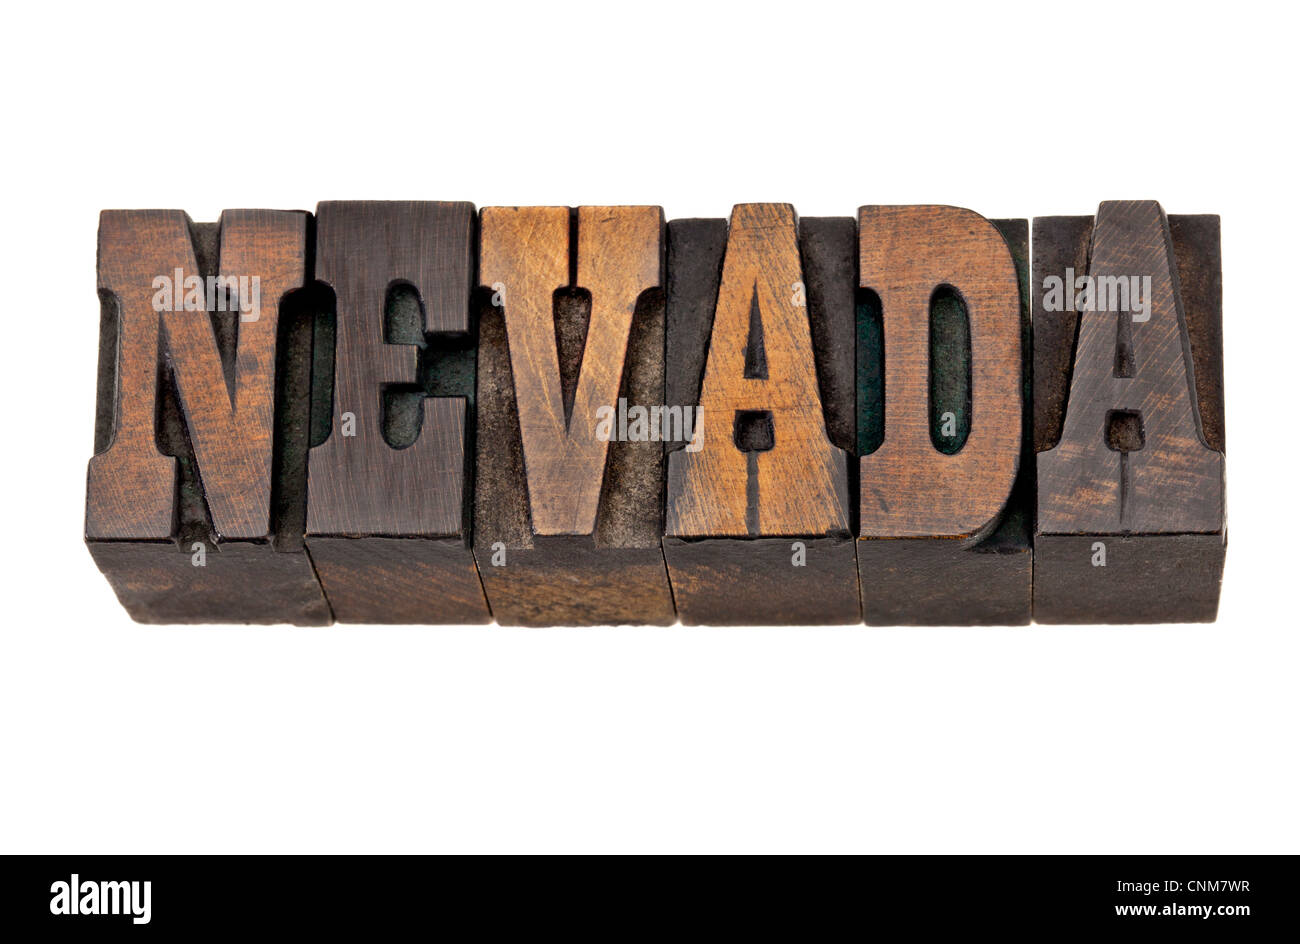 Nevada - isolated word in vintage letterpress wood type - French Clarendon font popular in western movies and memorabilia Stock Photo